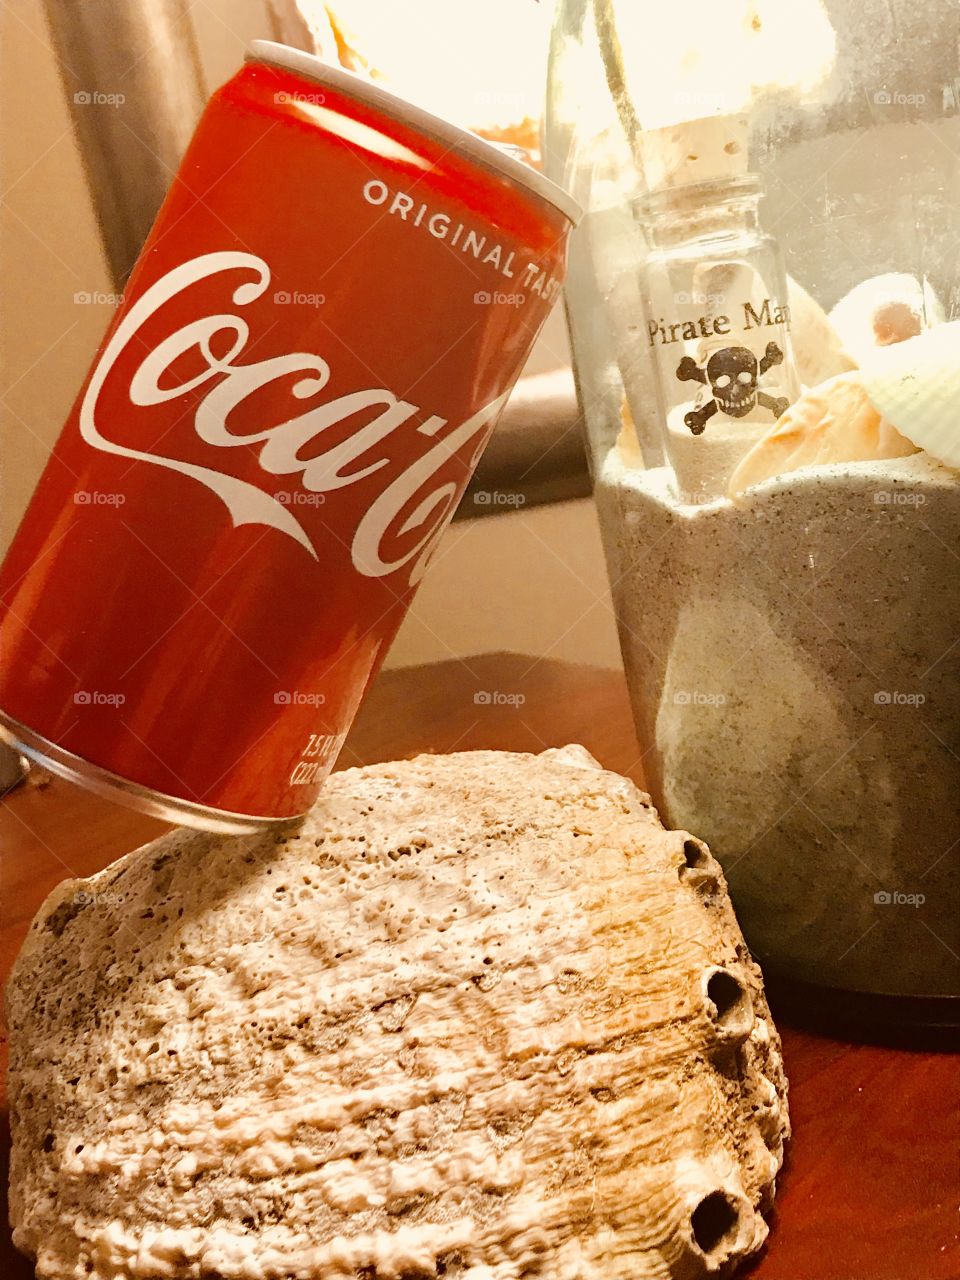 I enjoy having a Coke while dreaming of my next trip to the beach. 